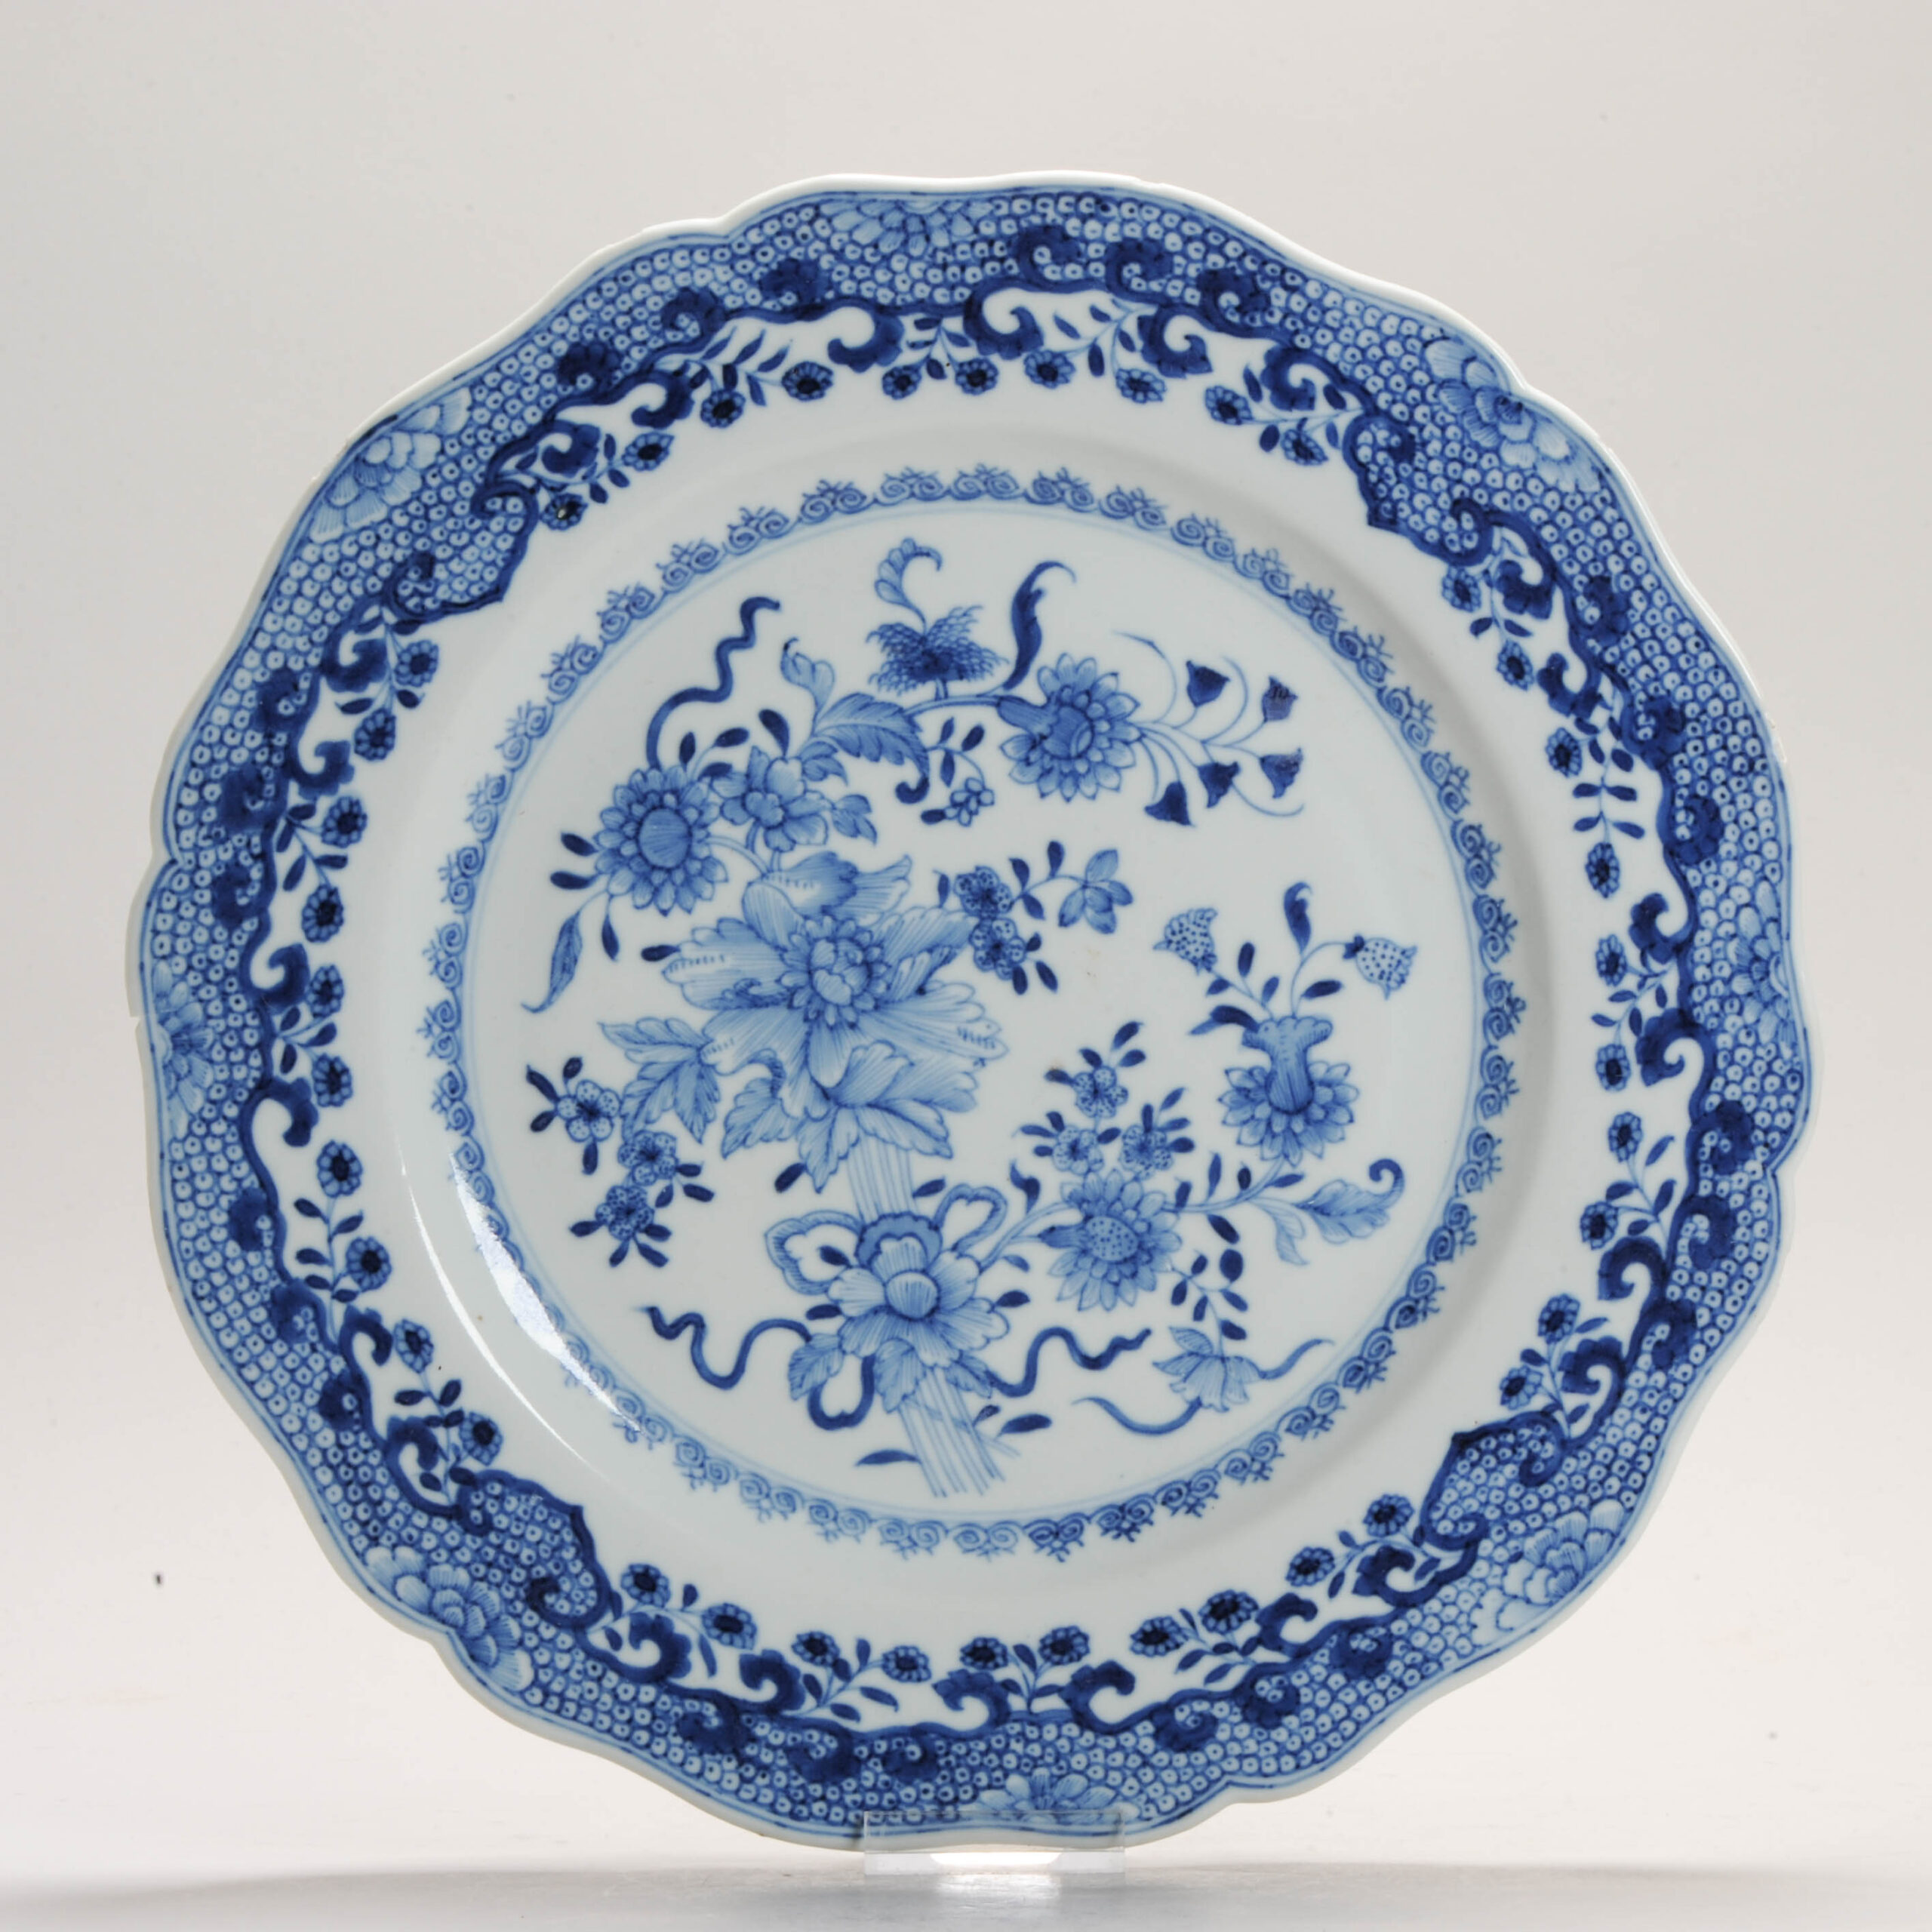 Antique Plate 18th Century Chinese Porcelain Blue and White Garden Qianlong